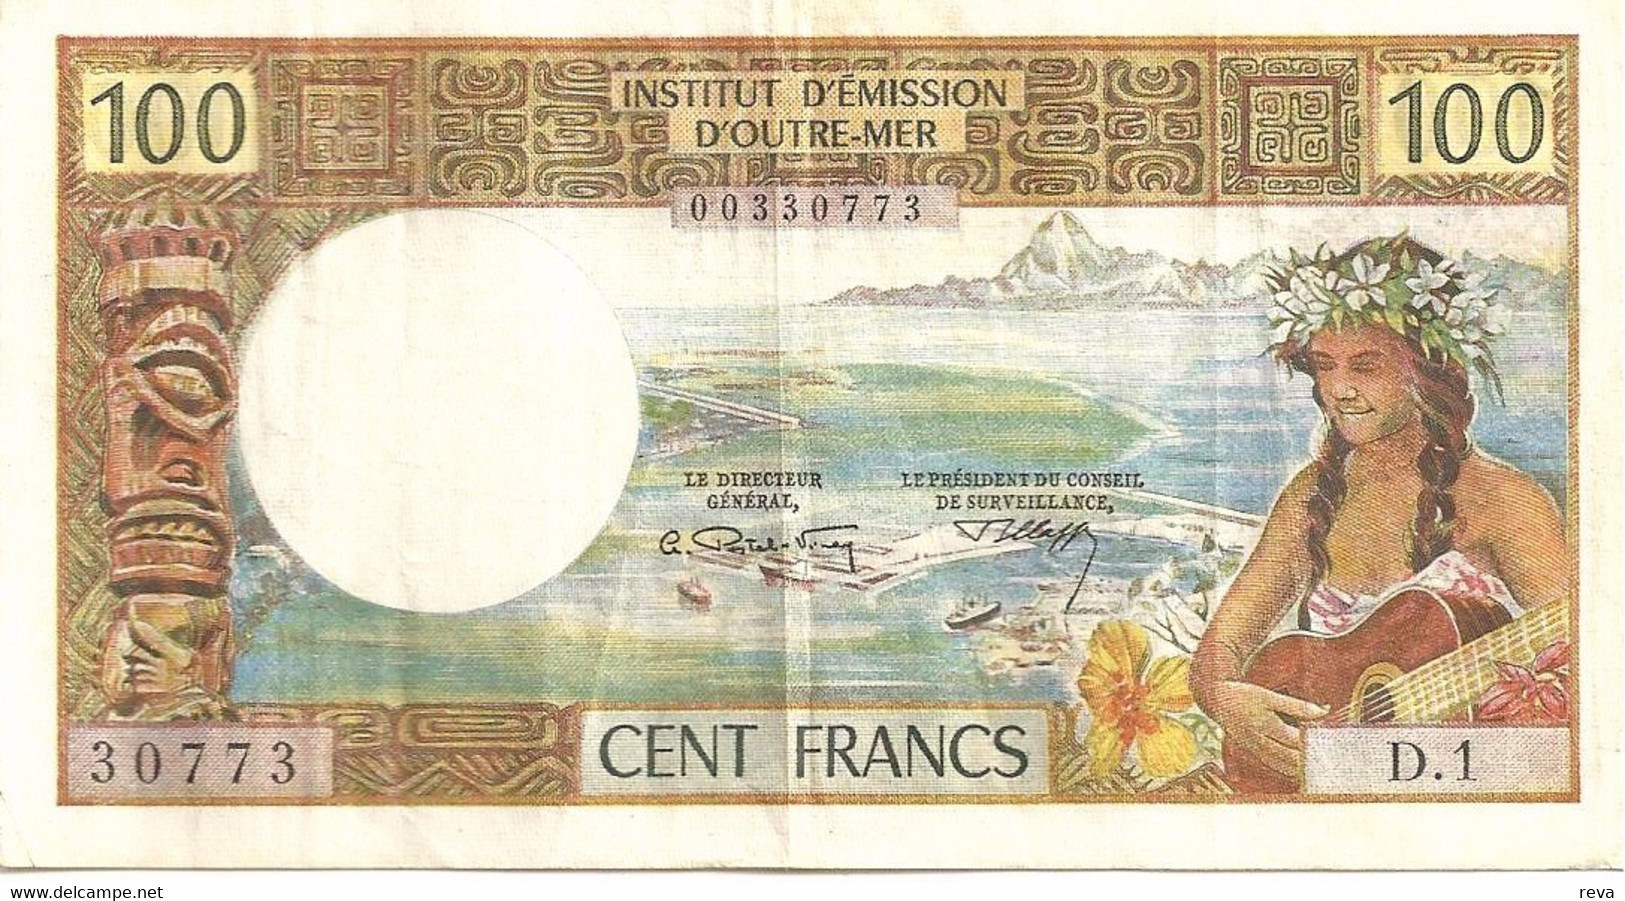 FRENCH POLYNESIA 100 FRANCS BROWN WOMAN FRONT WOMAN HEAD BACK NOT DATED(1971) P24b SIG VARIETY F READ DESCRIPTION!! - Papeete (Polinesia Francesa 1914-1985)